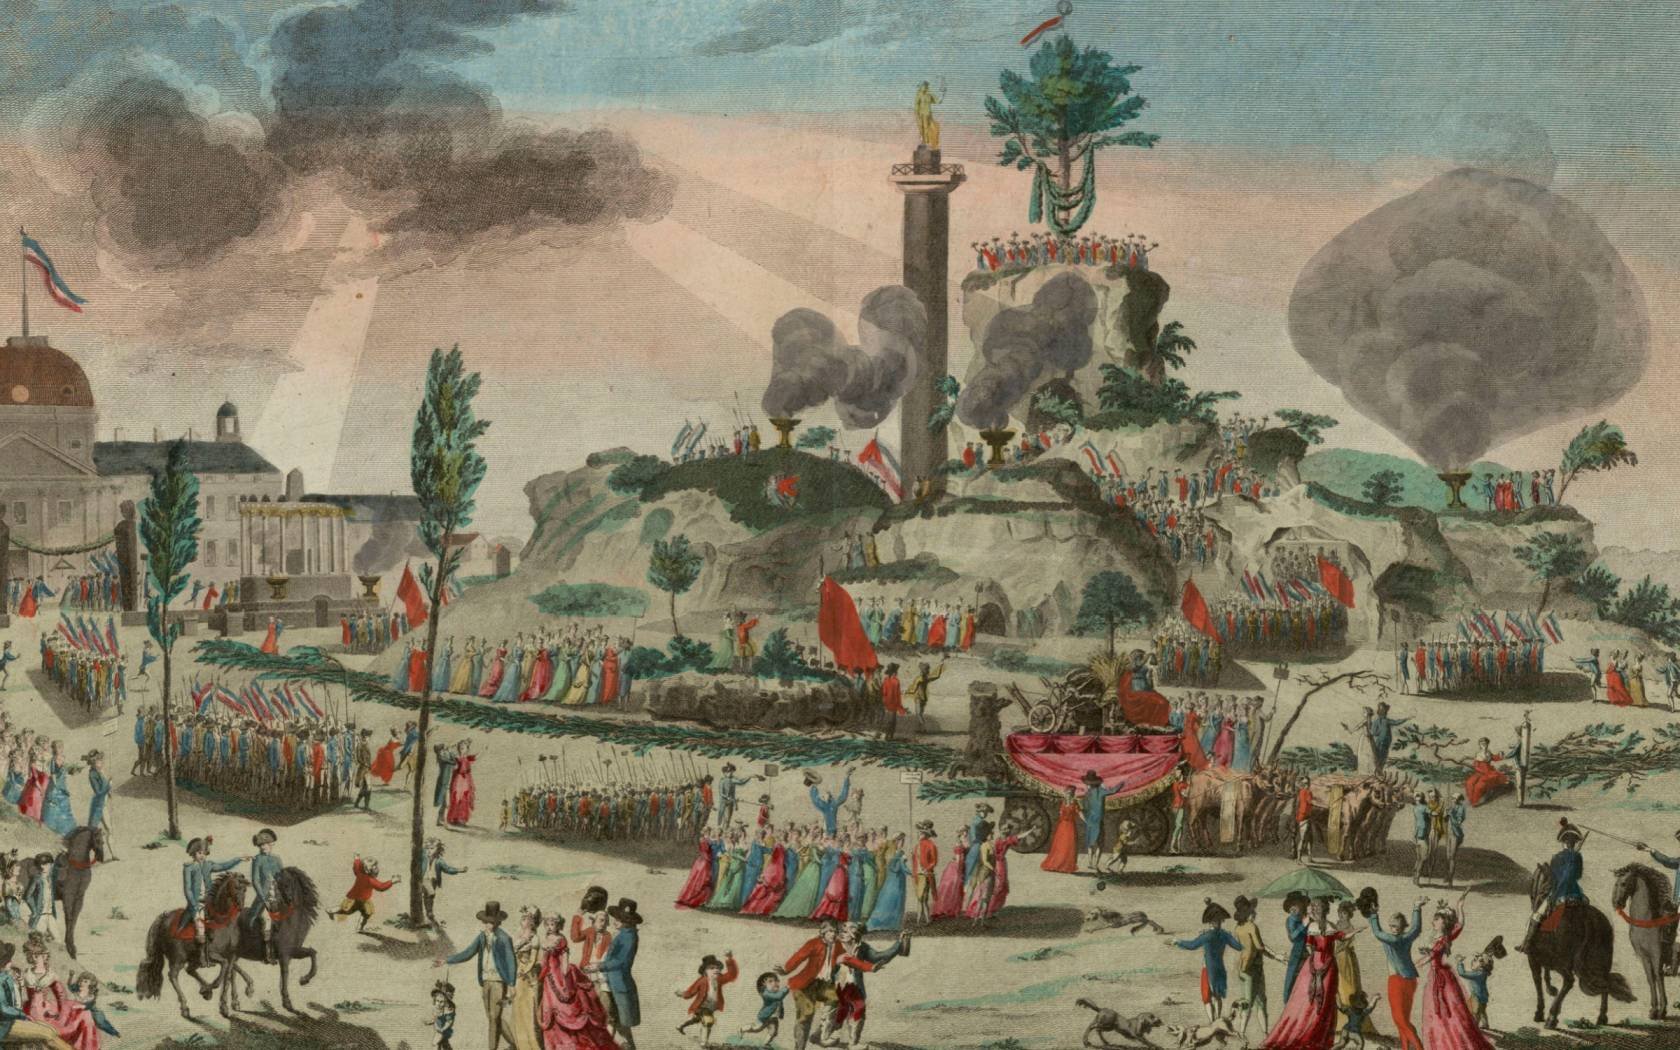 The Festival of the Supreme Being at the Field of Mars, 8 June 1794, 1794.